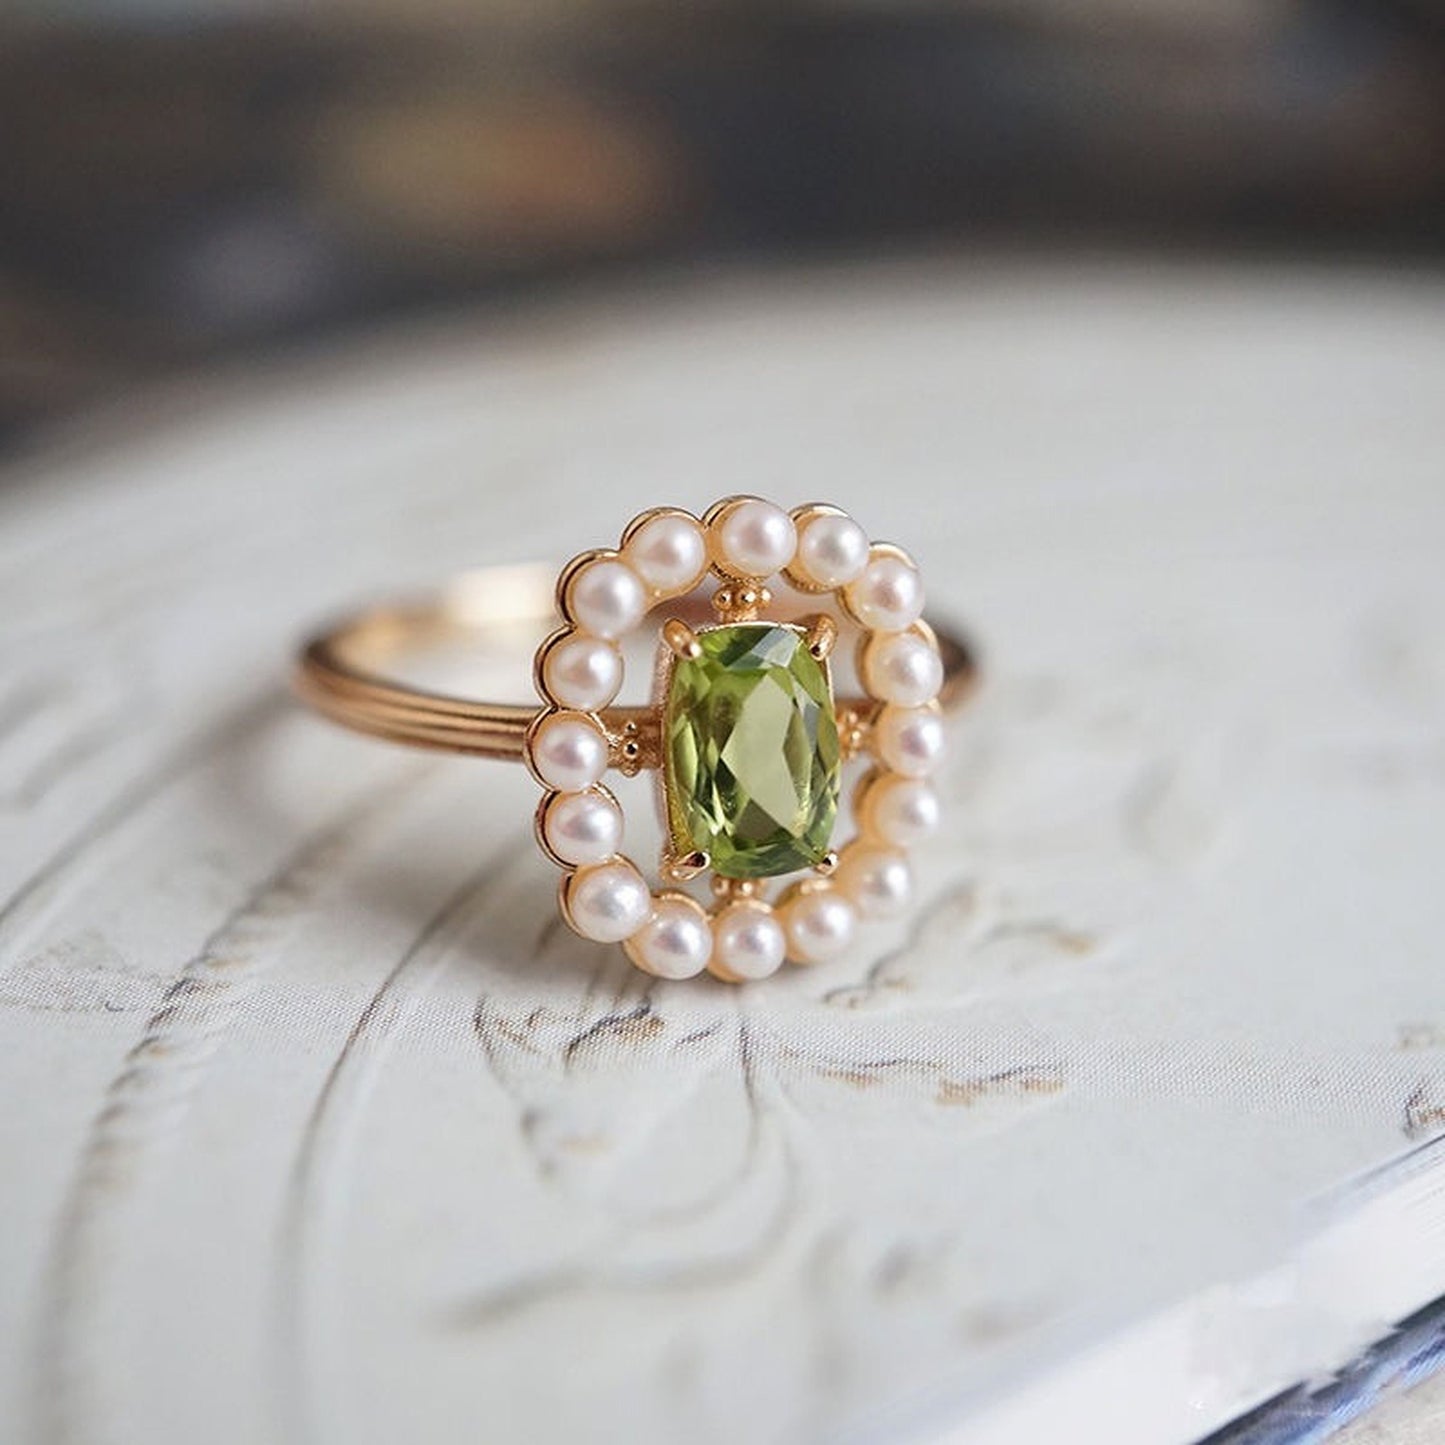 Rose Gold Green Olivine Ring, Natural Peridot Stone Ring, Olive Green Ring, Pearl Halo Ring, Green Birthstone Rings, Luxury Rings, Gift Idea